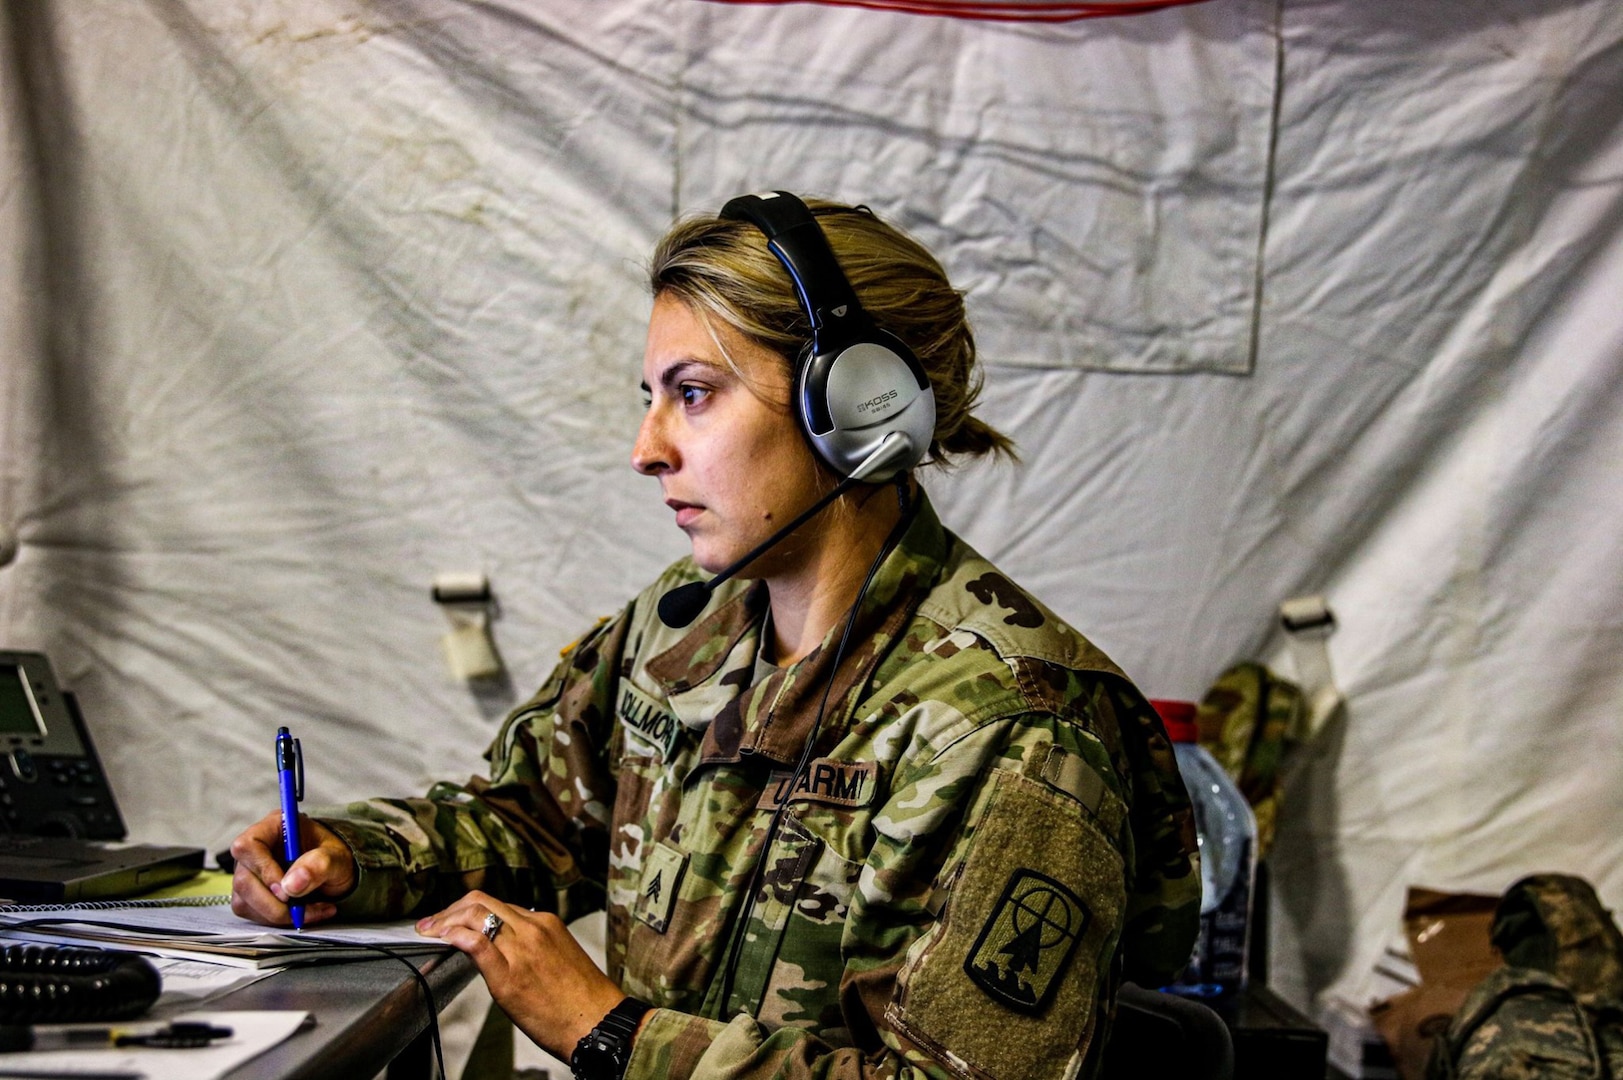 Sgt. Amanda Kollmorgan, a multiple launch rocket system crewmember with the Headquarters and Headquarters Company, 157th Maneuver Enhancement Brigade, during a Warfighter Exercise at Fort Campbell, Ky., Oct. 1-10, 2019. Kollmorgan and the rest of the 157th Maneuver Enhancement Brigade headquarters supported the two-week exercise by coordinating security, logistics, protection and artillery for the 101st Airborne Division.